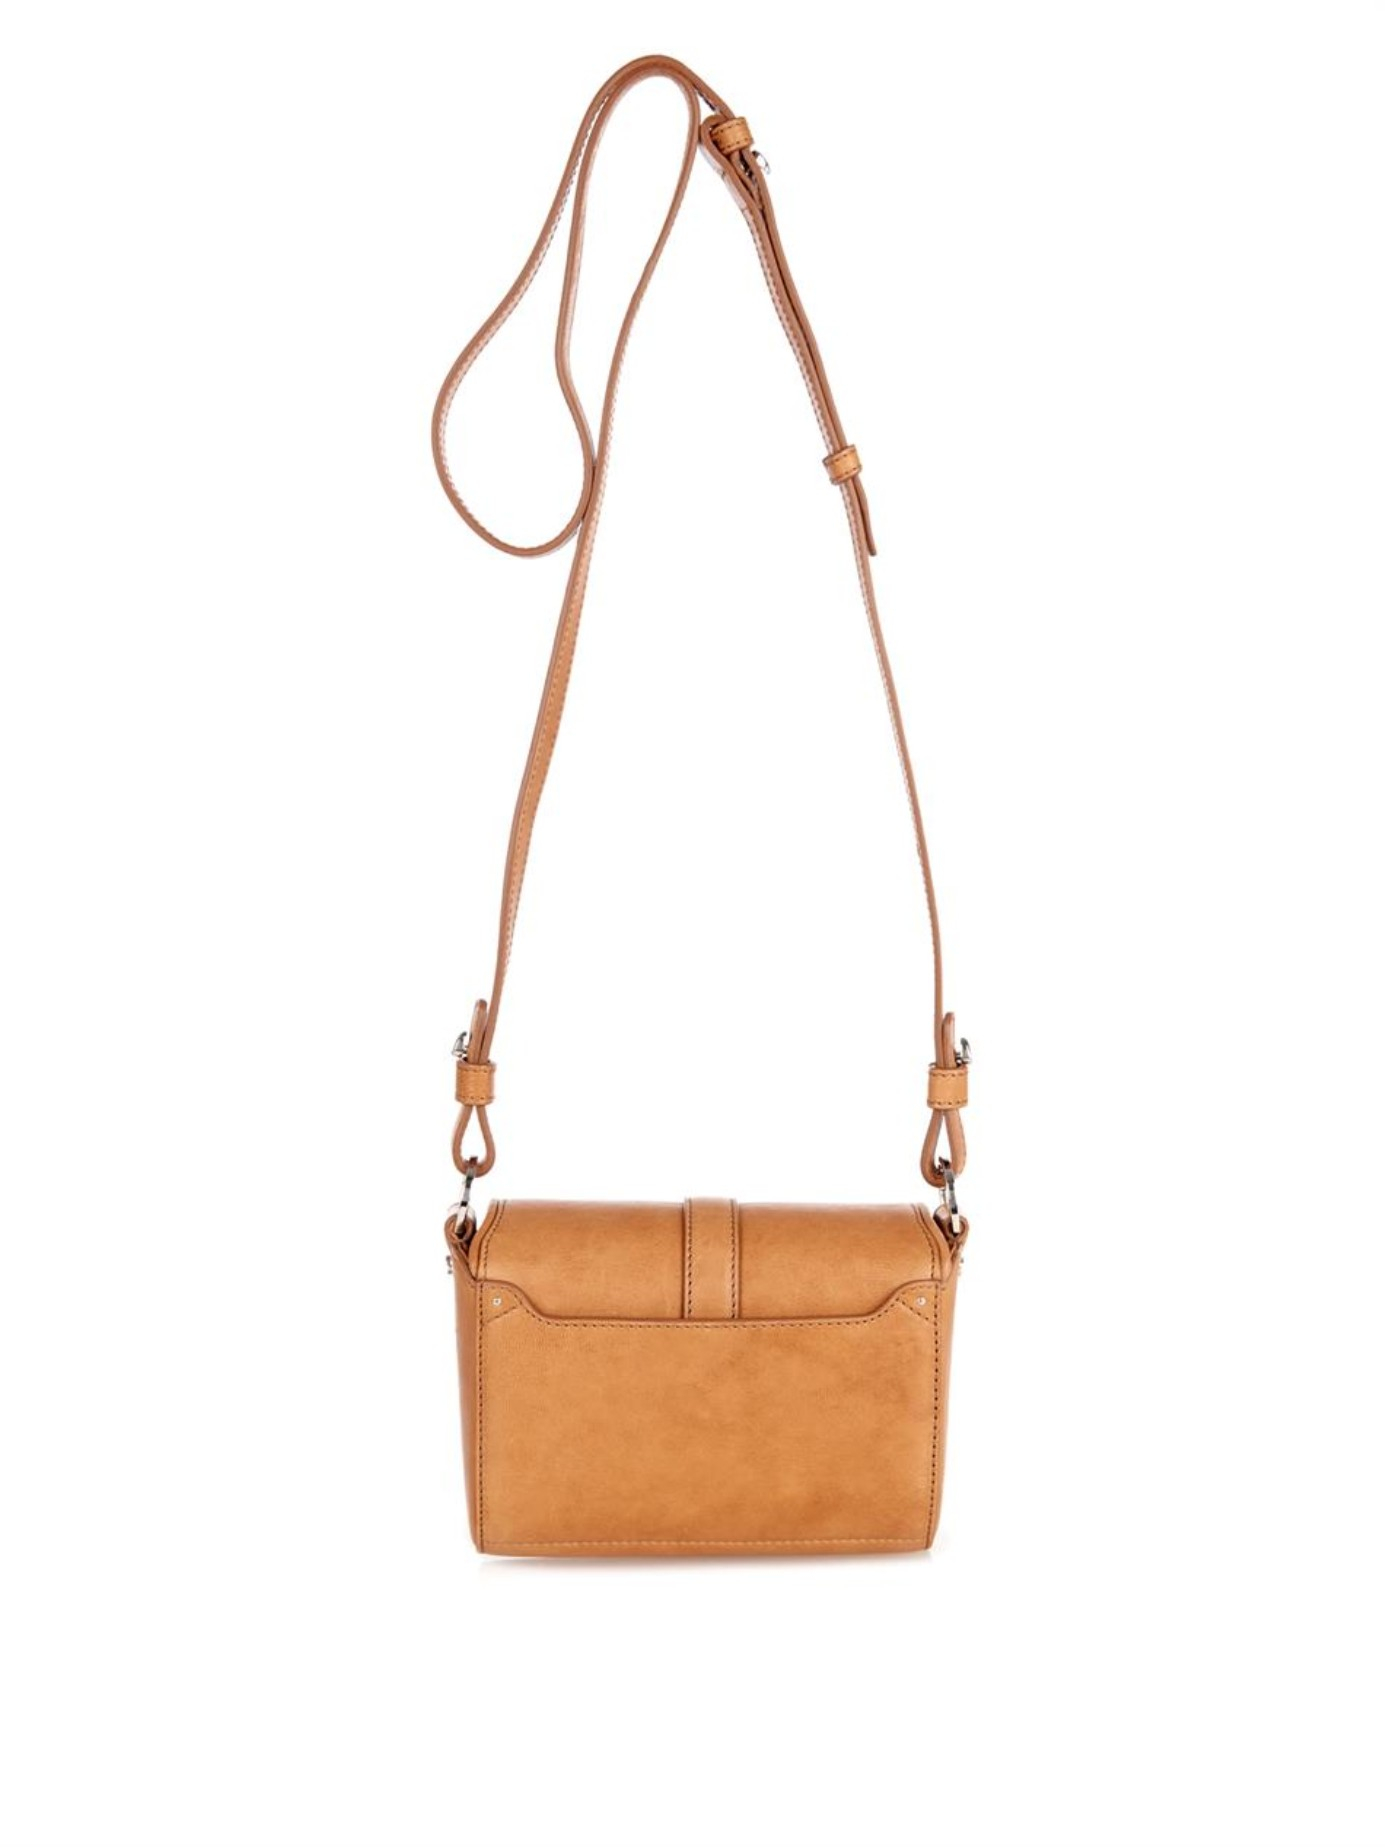 Lyst - Givenchy Obsedia Small Leather Cross-Body Bag in Brown